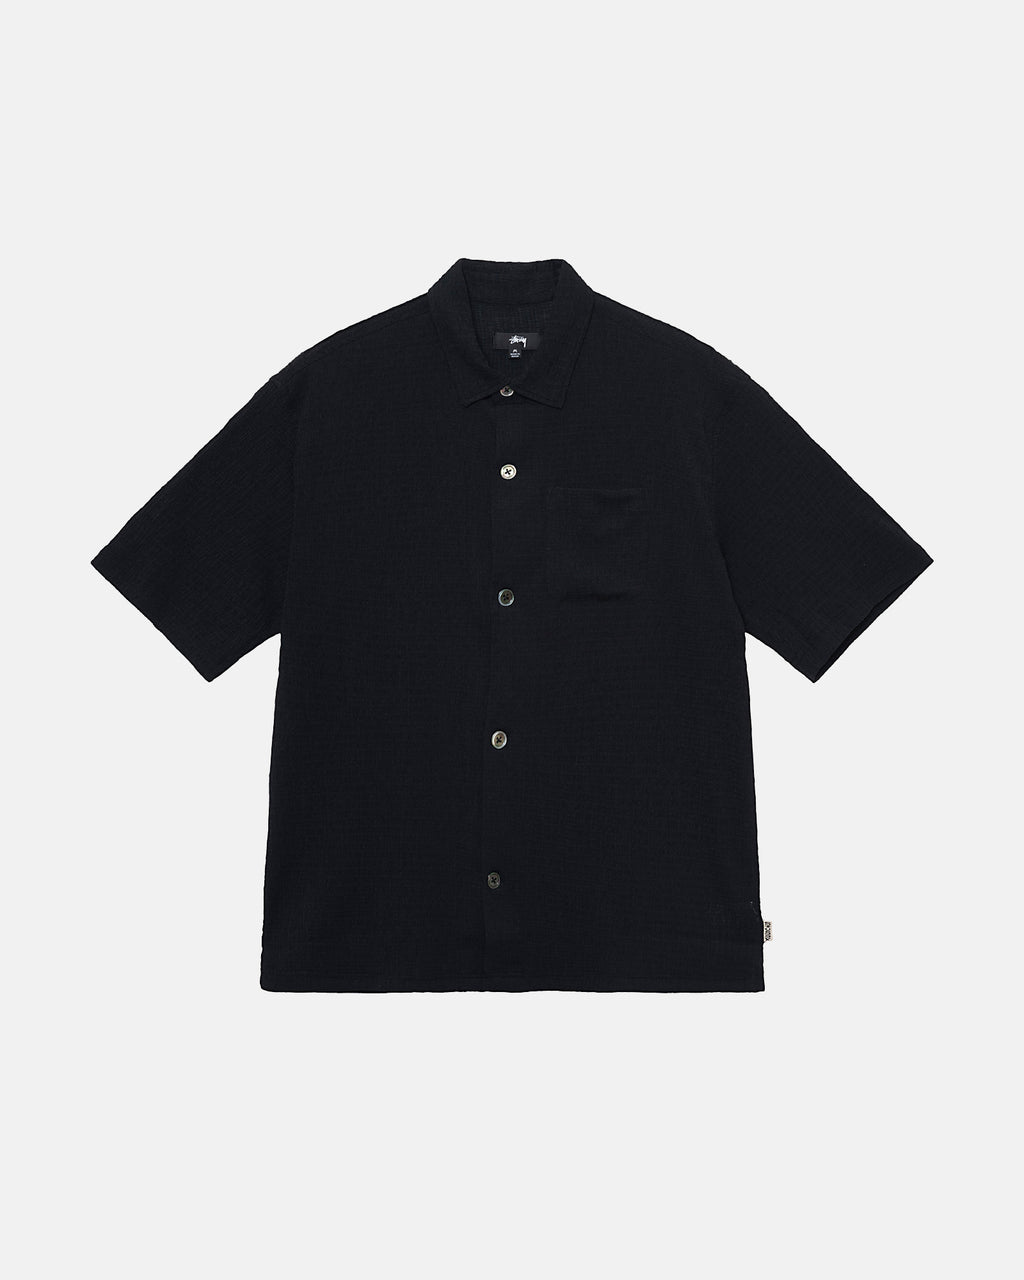 Stussy Tops & Shirts Wholesale - Black Wrinkly Gingham Ss Shirt